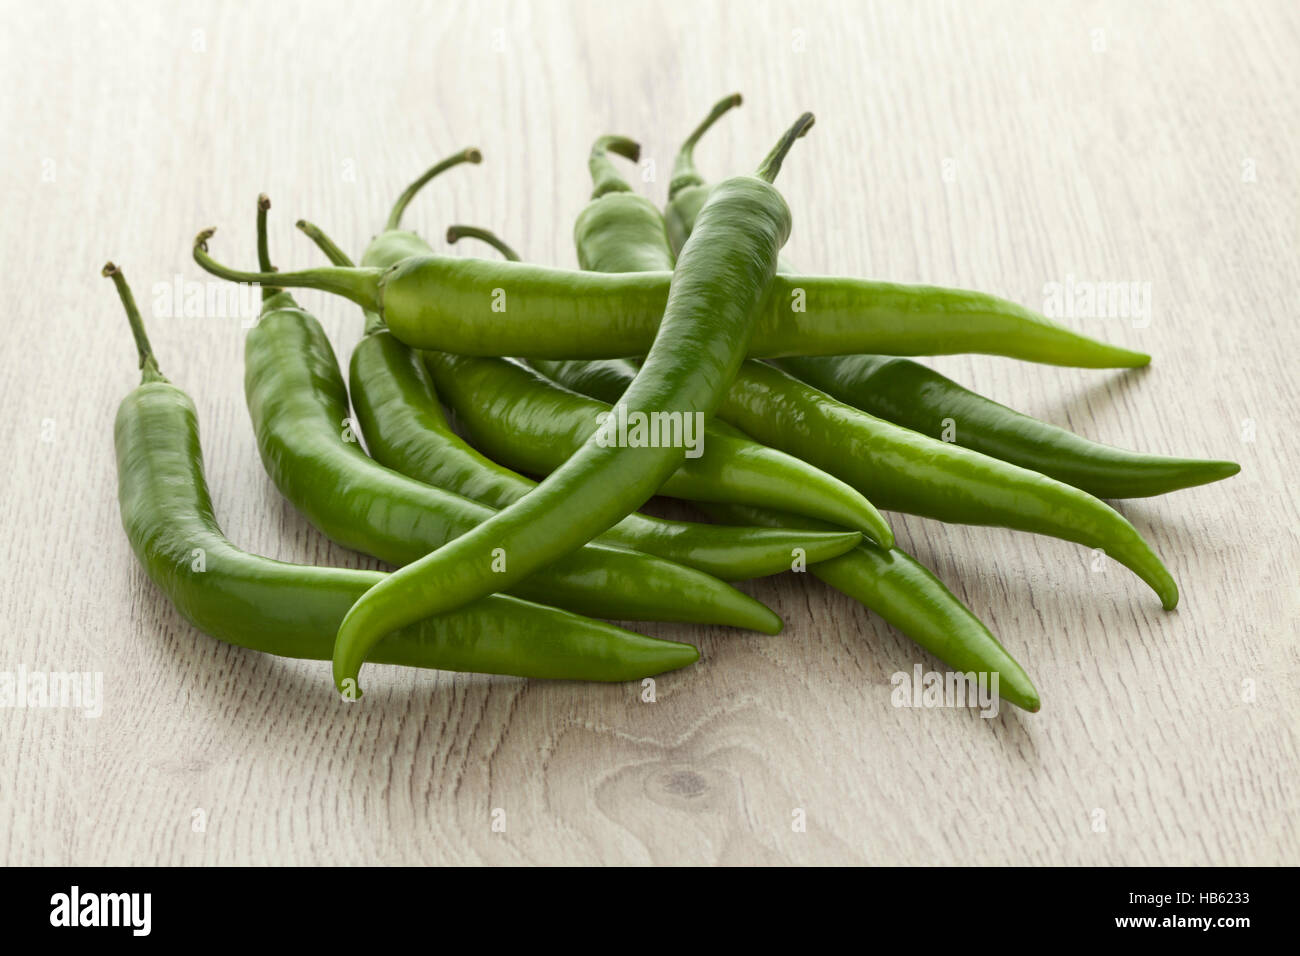 Heap of fresh green chili peppers Stock Photo